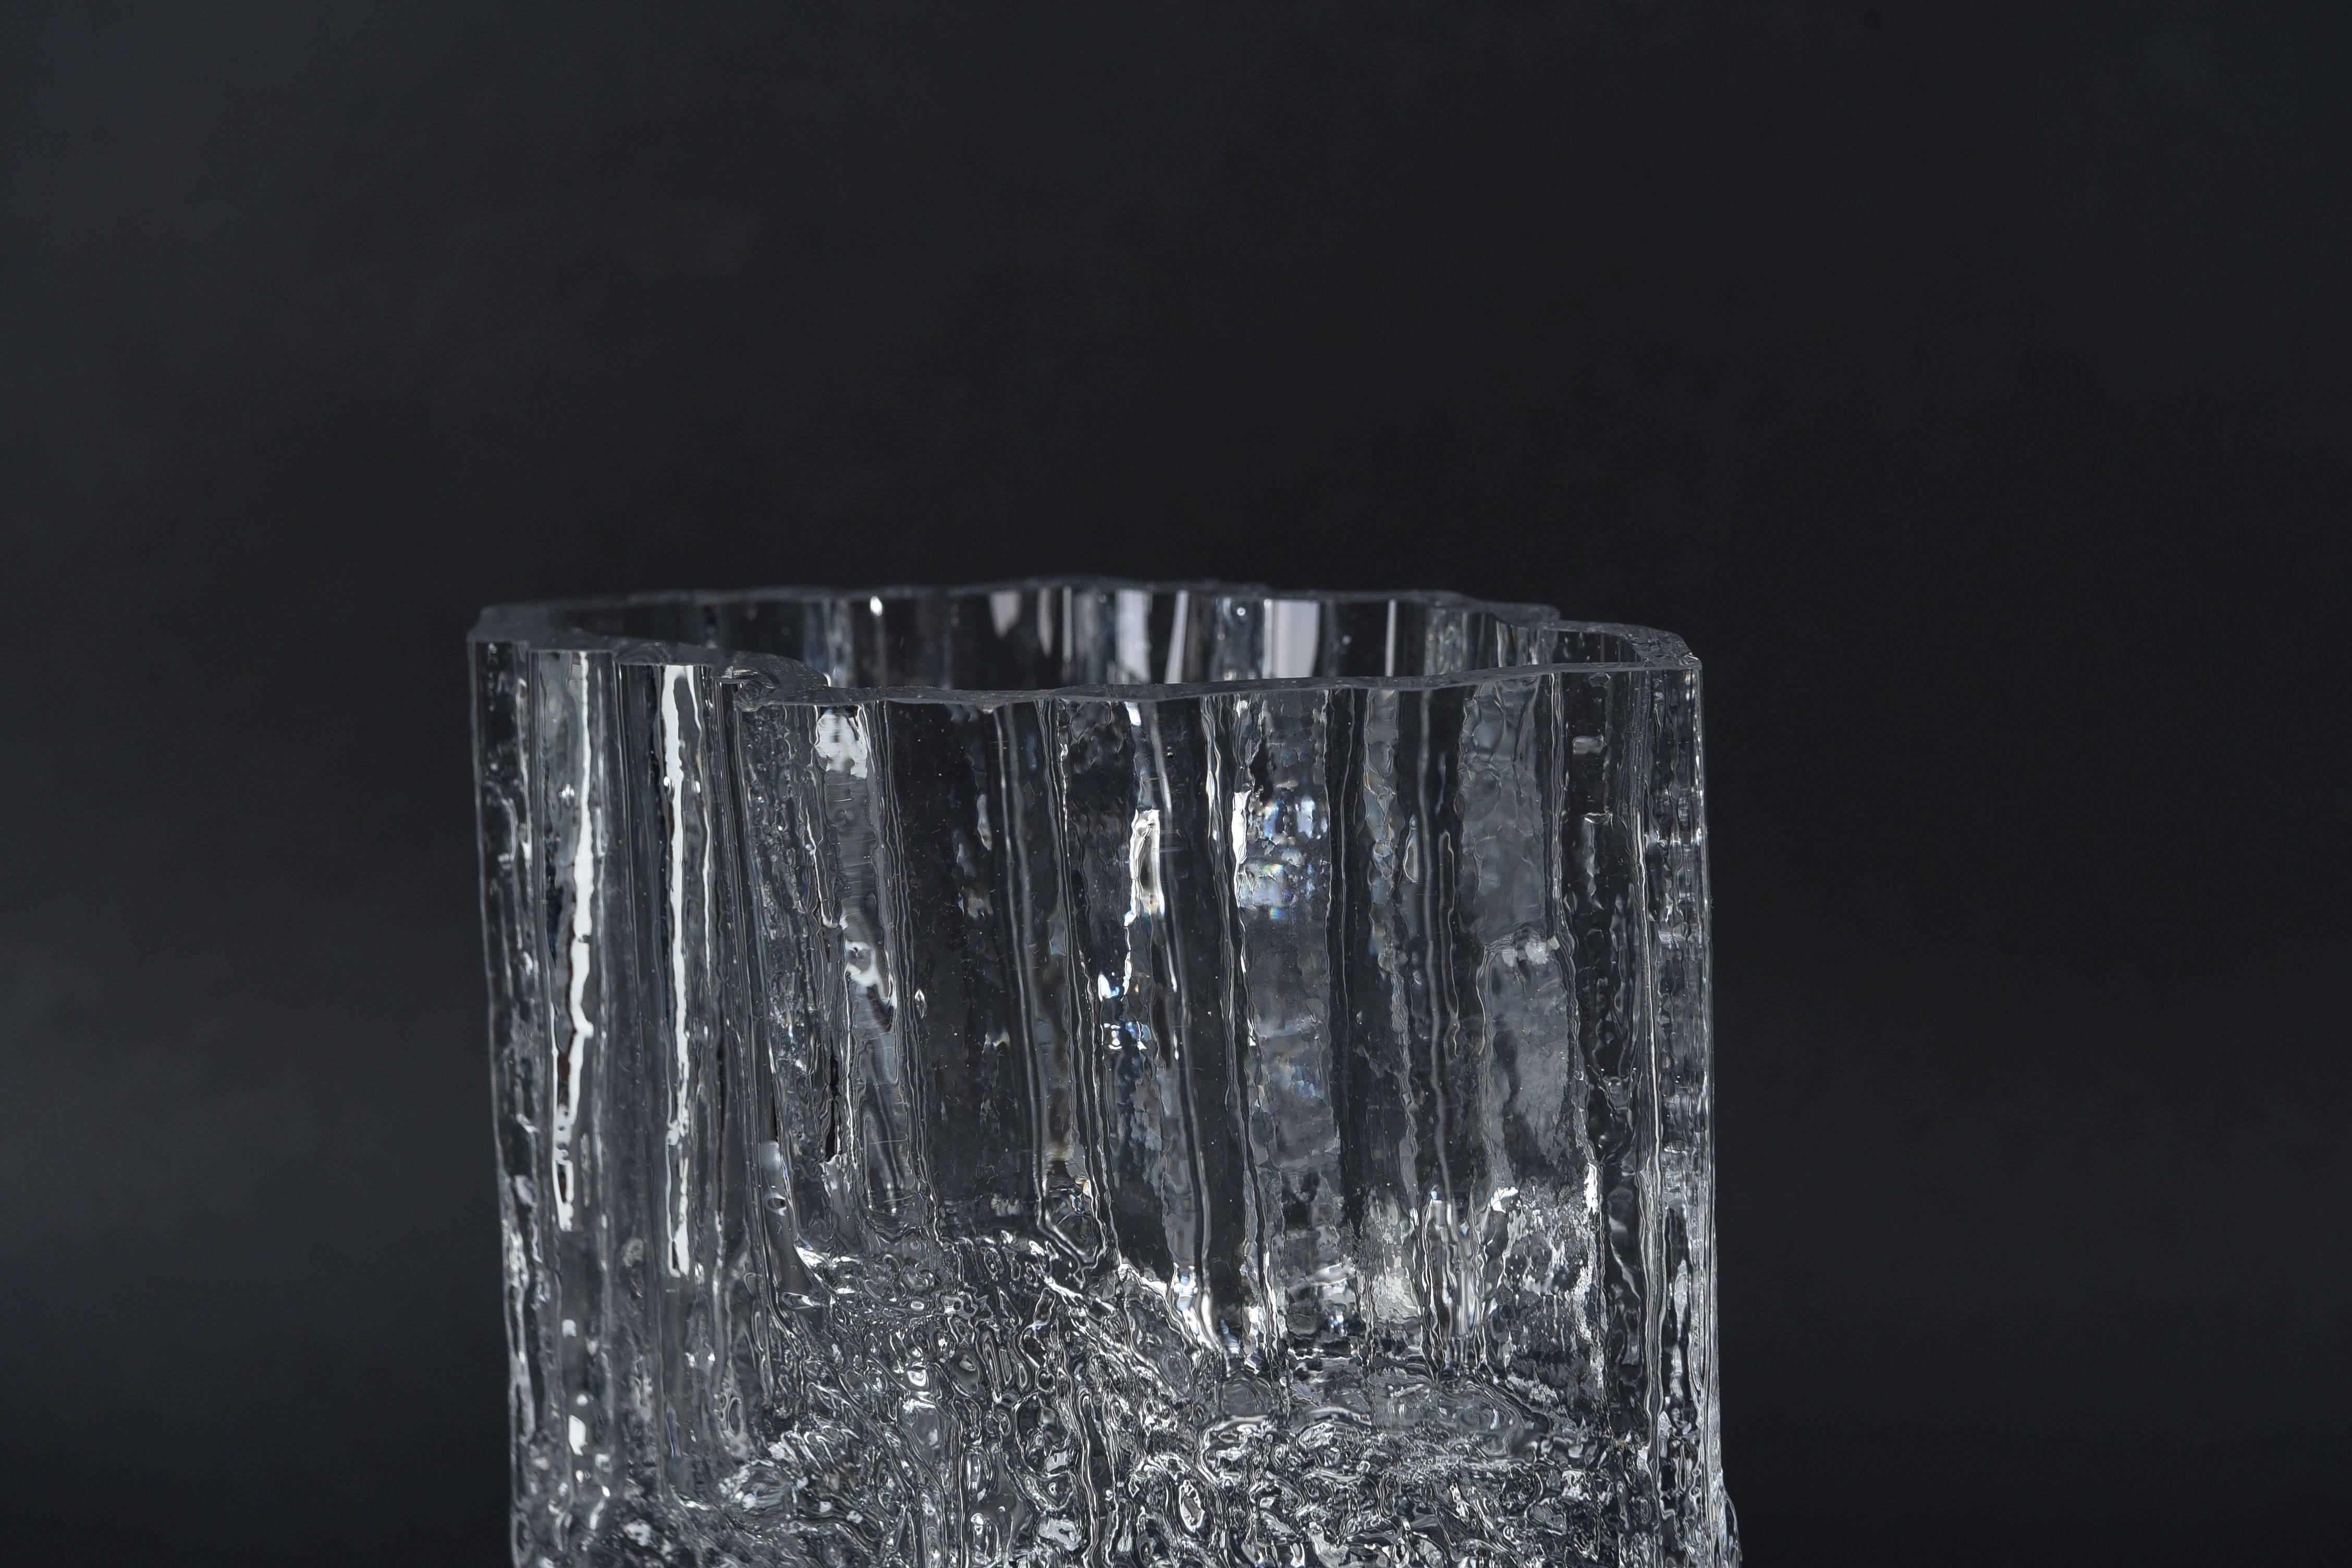 A wonderful clear, molded ice glass vase by Tapio Wirkkala for Iittala, circa 1970s. Very interesting shape and texture, resembling that of ice.